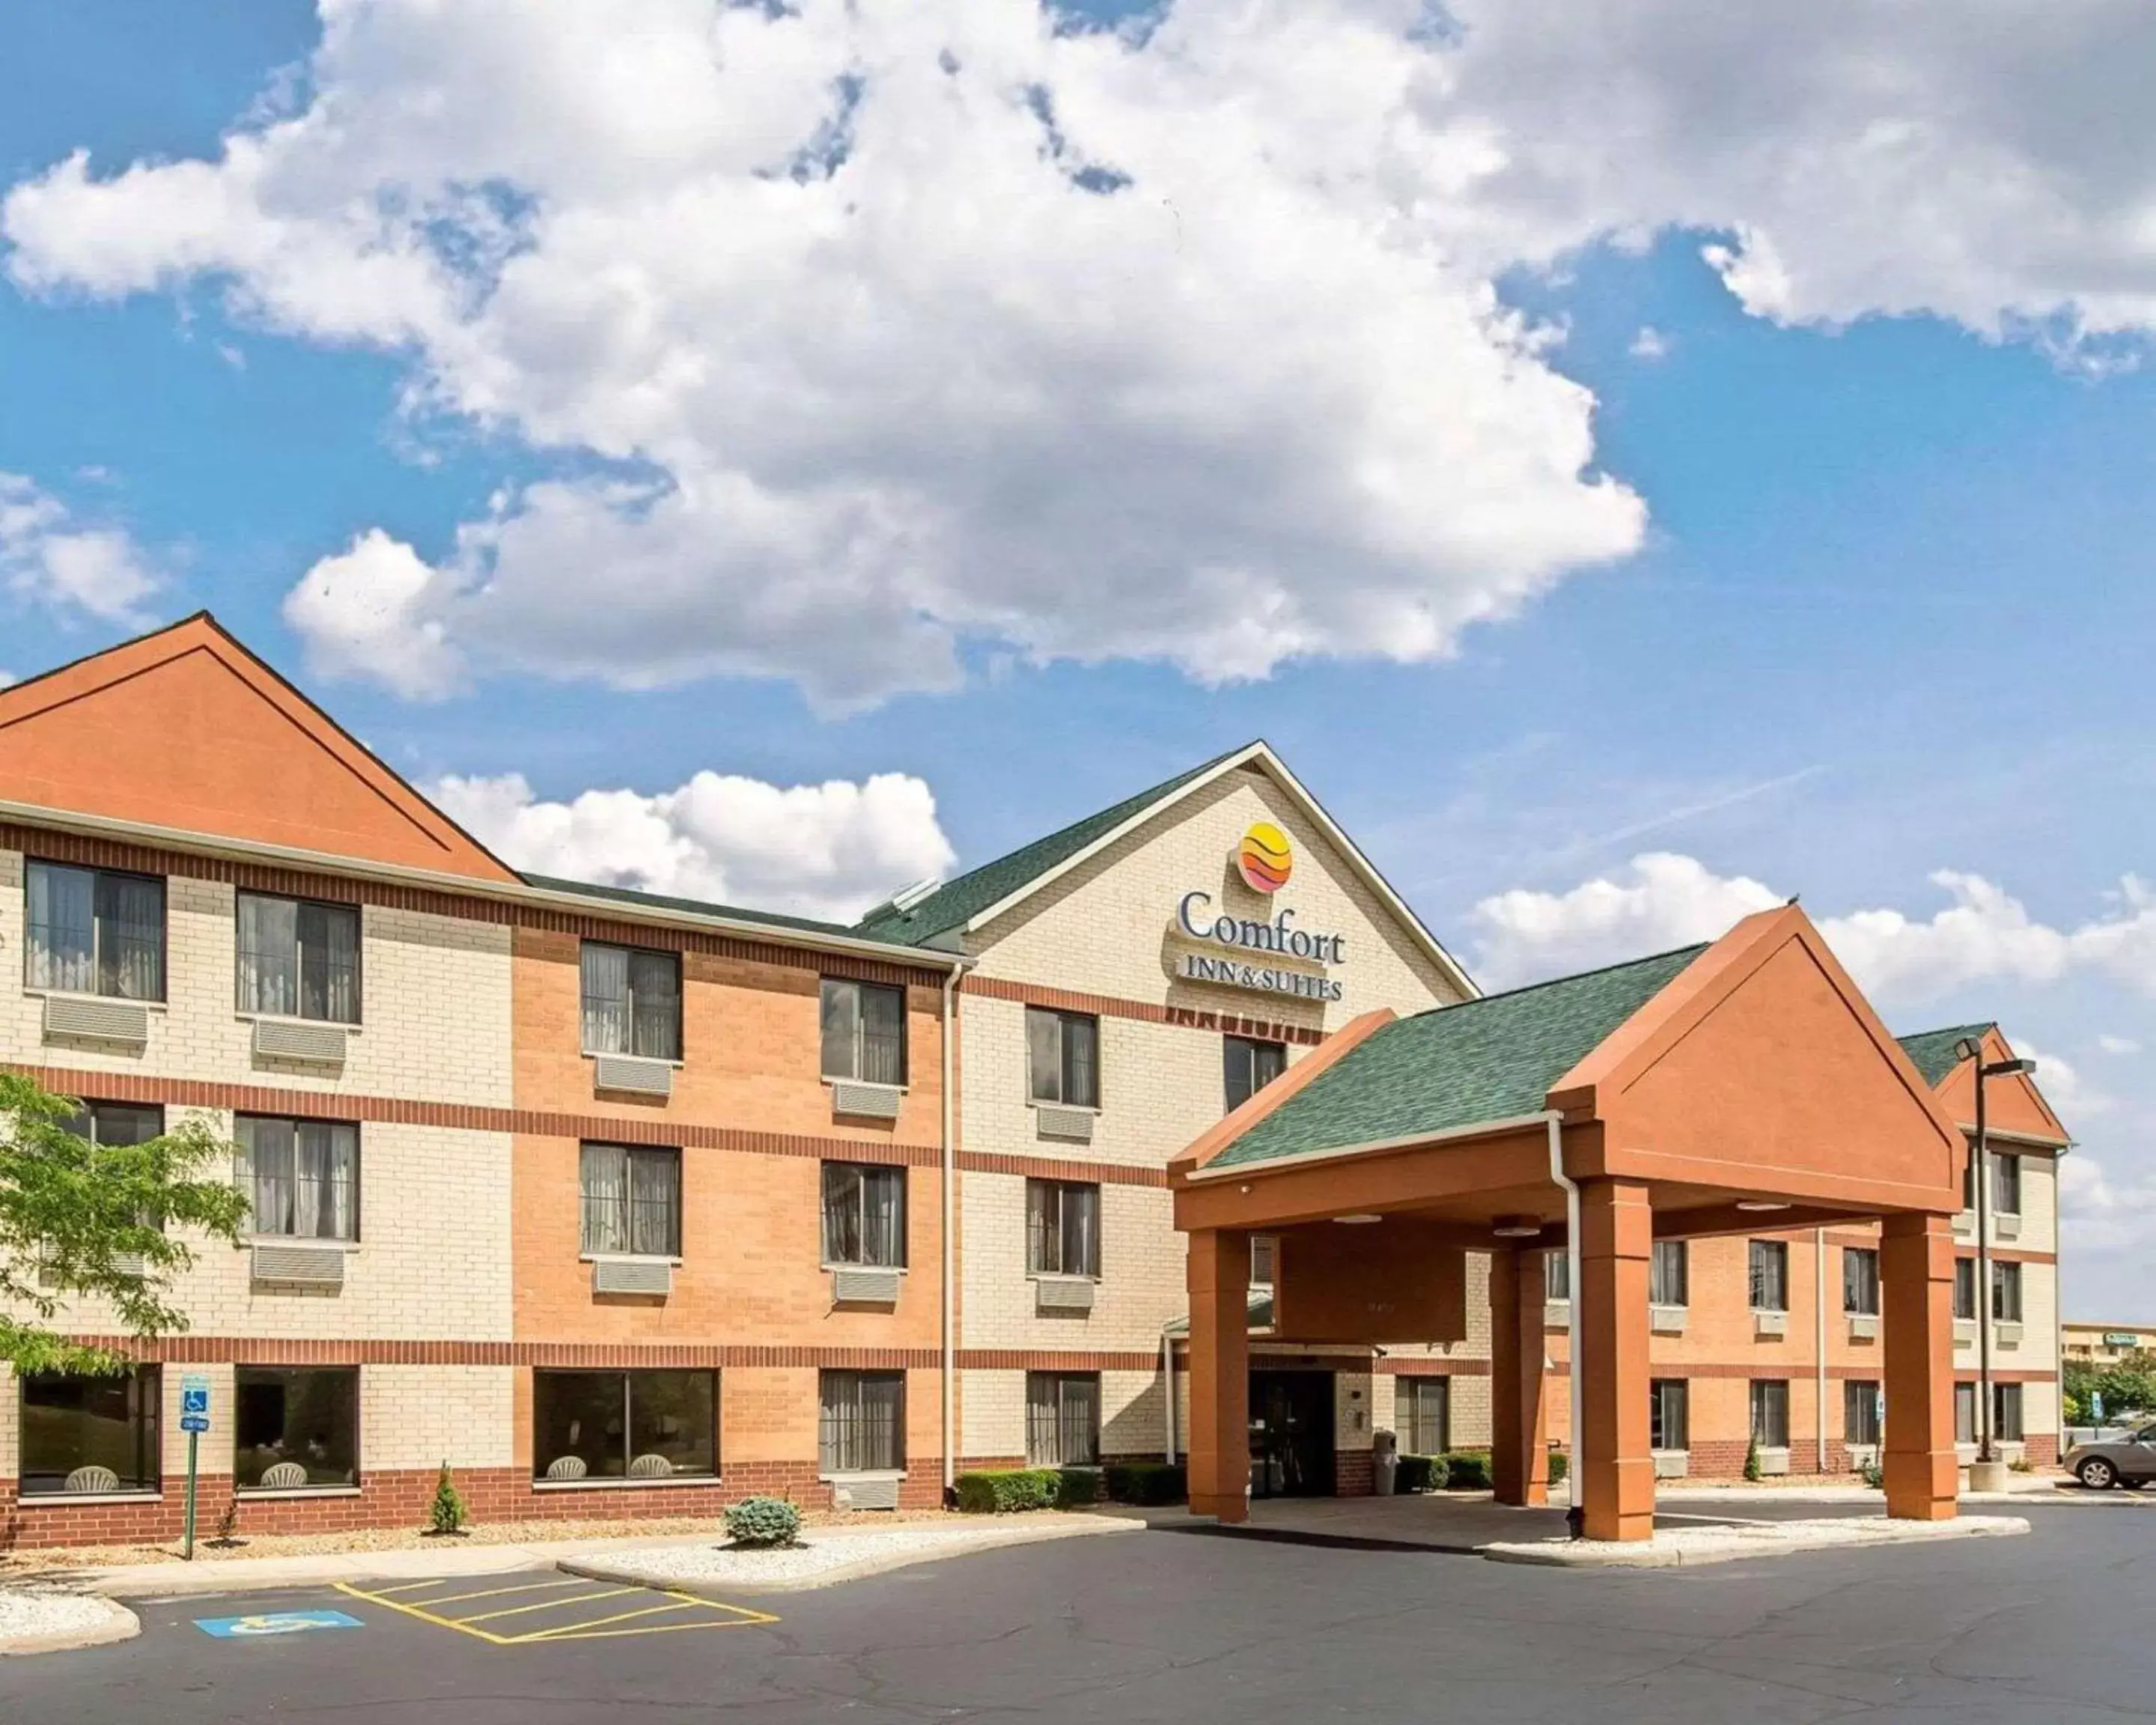 Property Building in Comfort Inn & Suites near Tinley Park Amphitheater